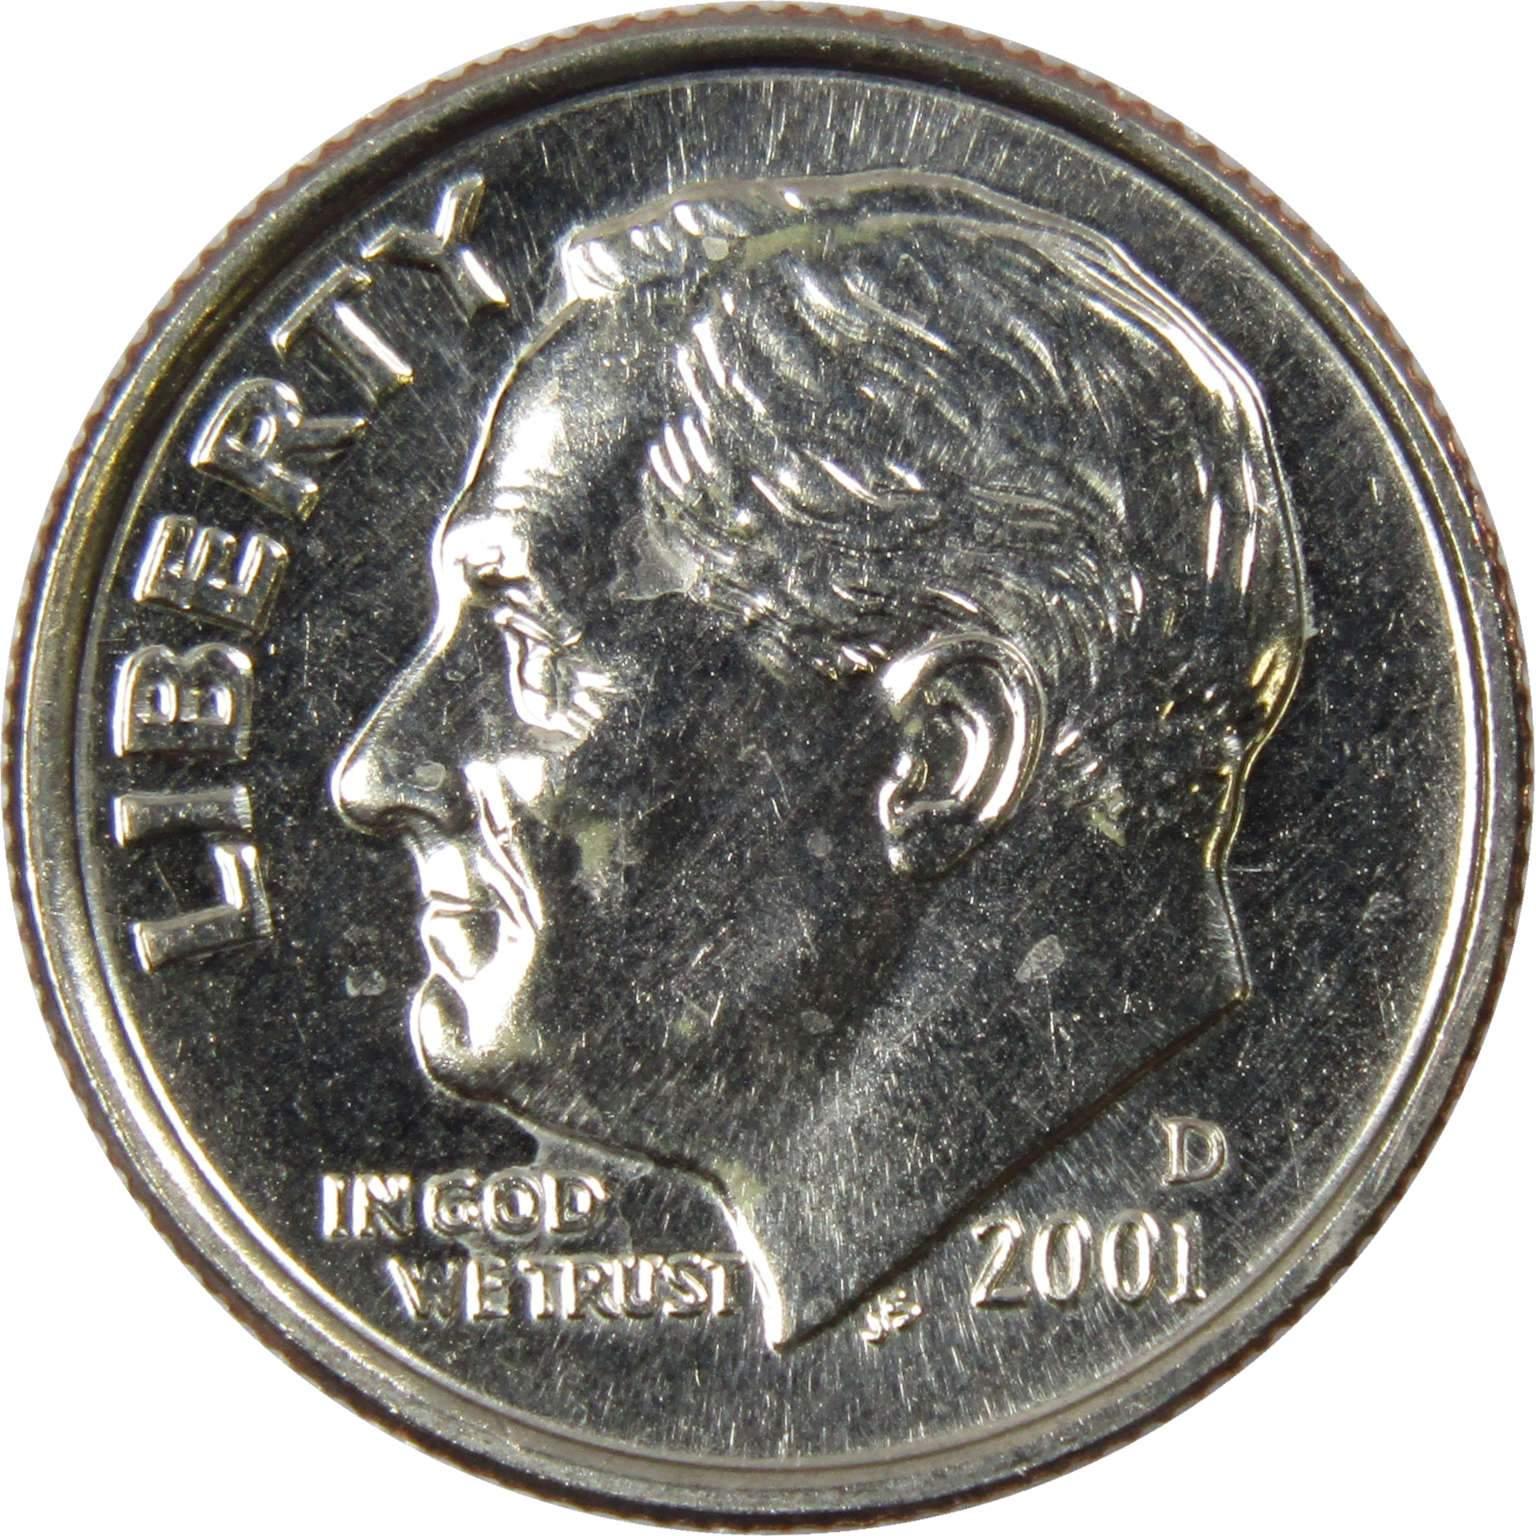 2001 D Roosevelt Dime BU Uncirculated Mint State 10c US Coin Collectible